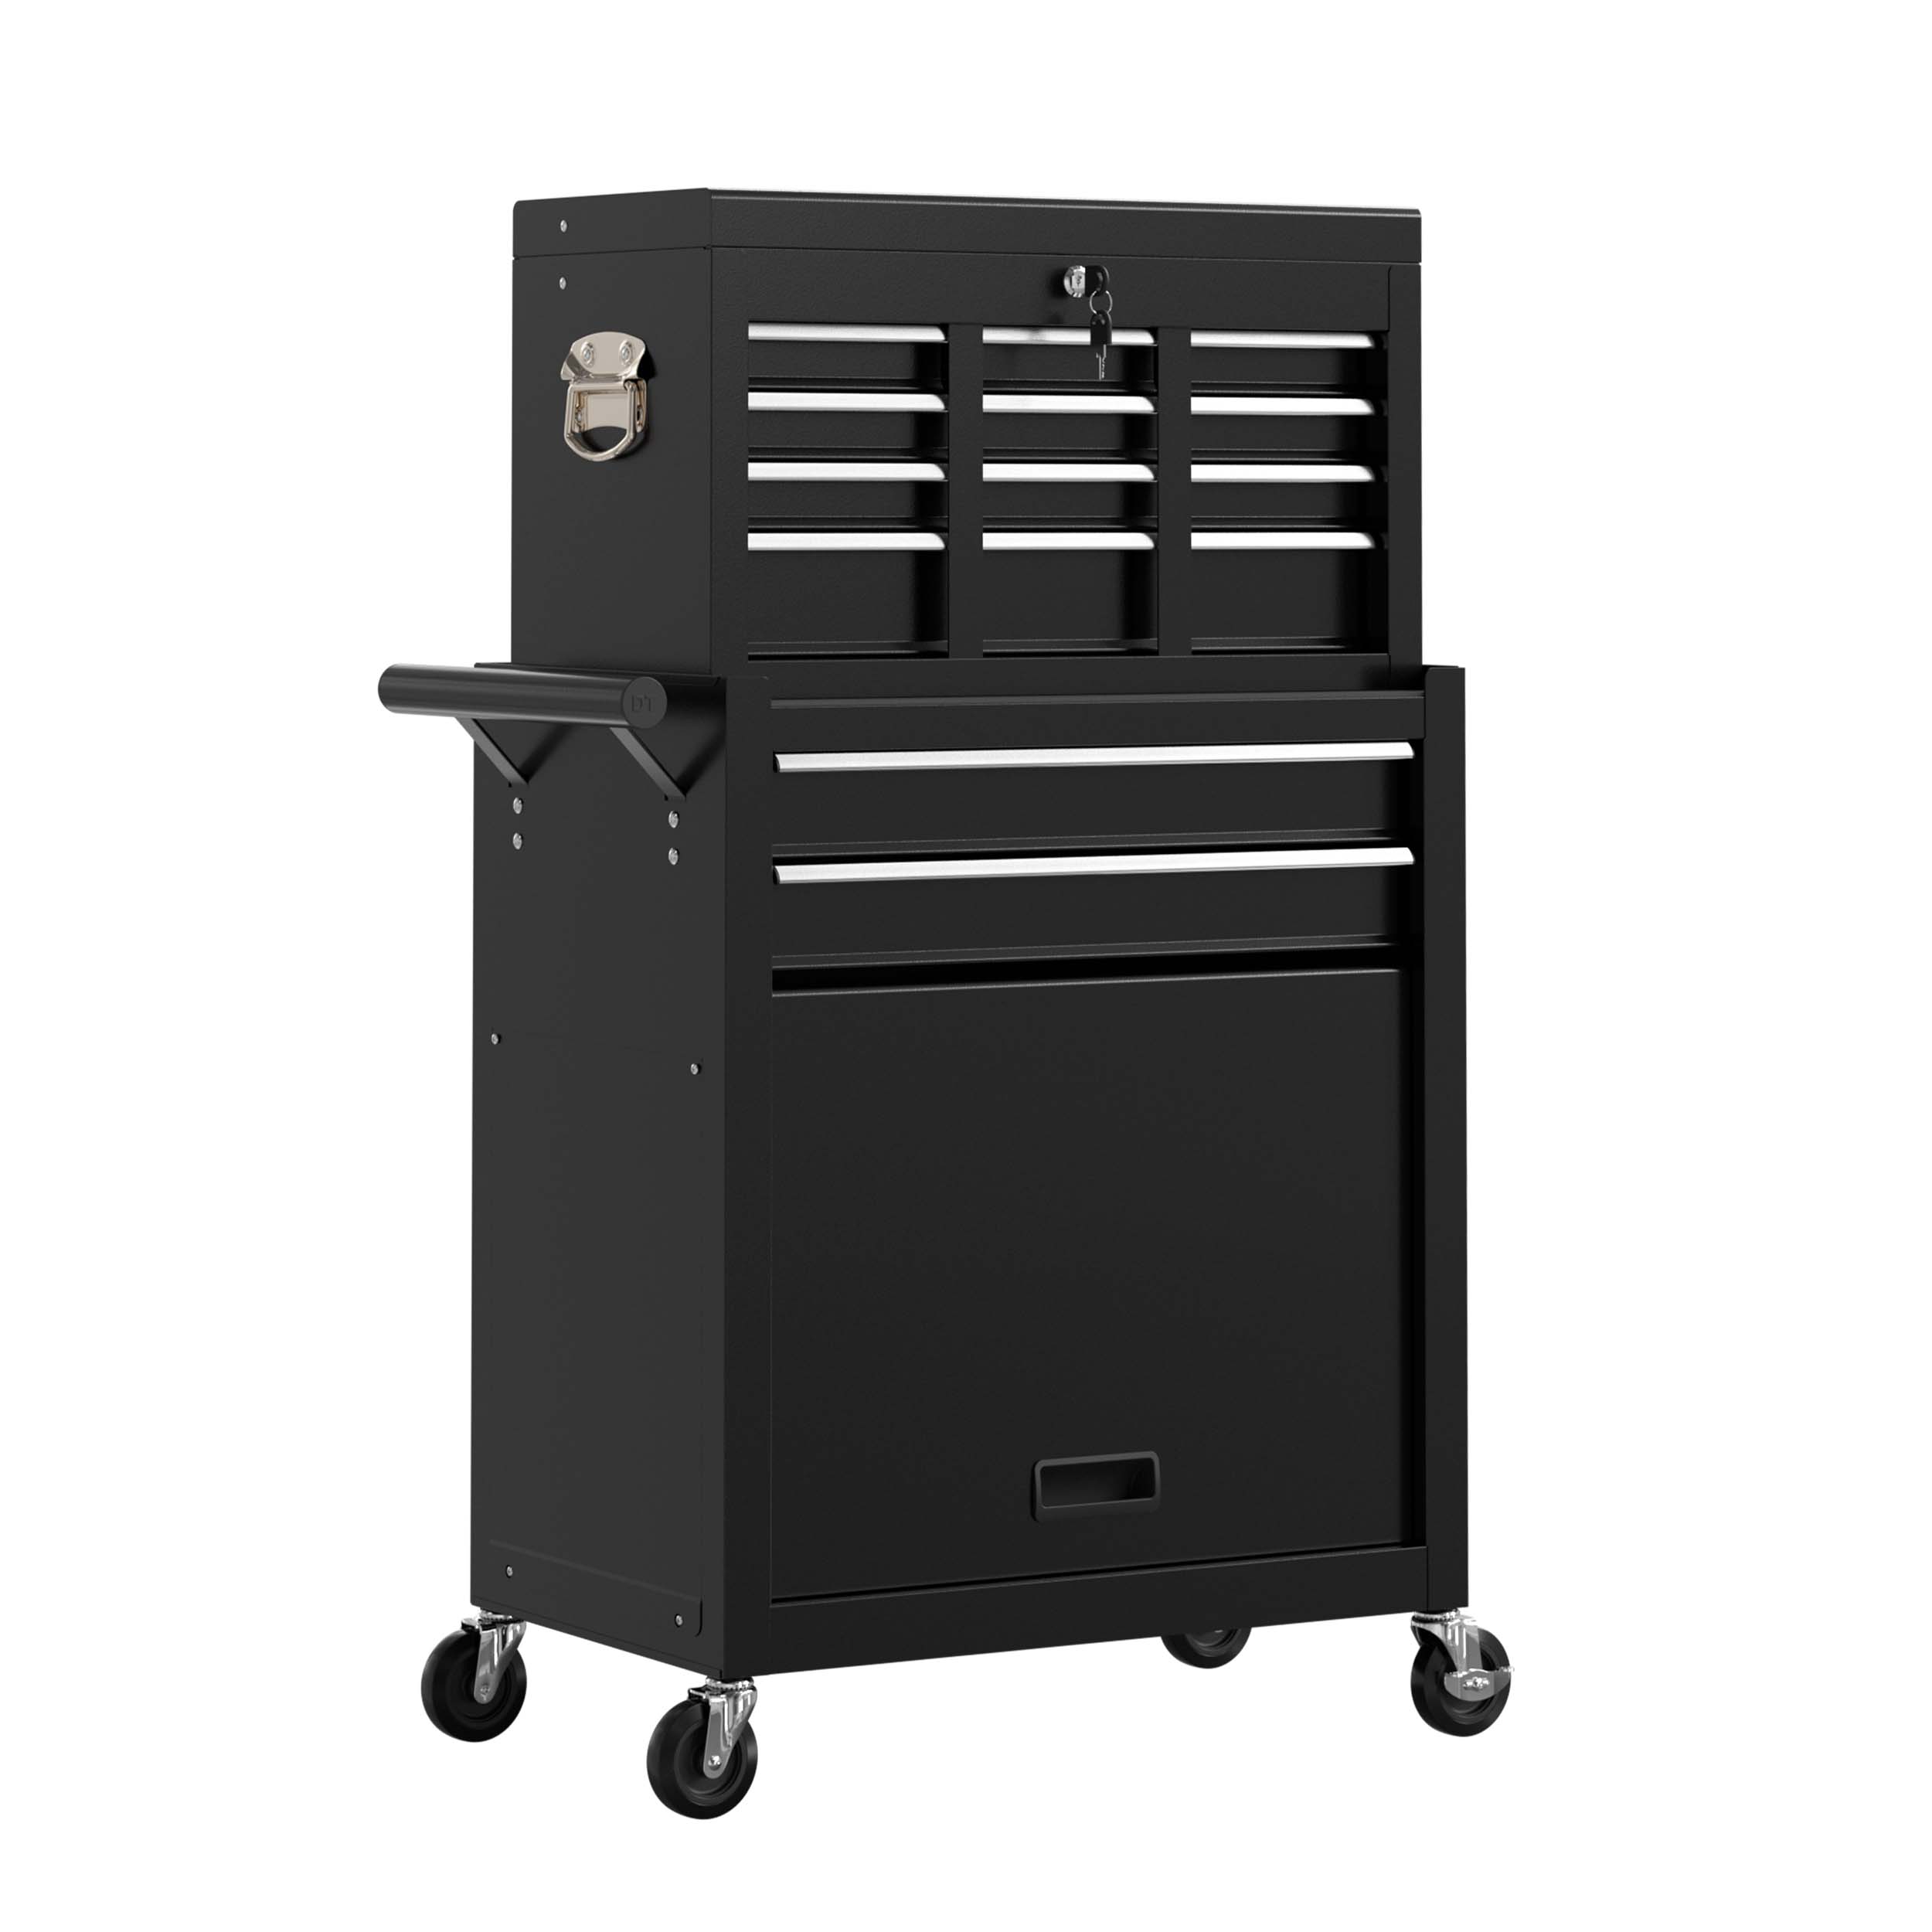 RaDEWAY 24.4-in W x 42.9-in H 8 Ball-bearing Steel Tool Chest Combo (Black)  in the Tool Chest Combos department at